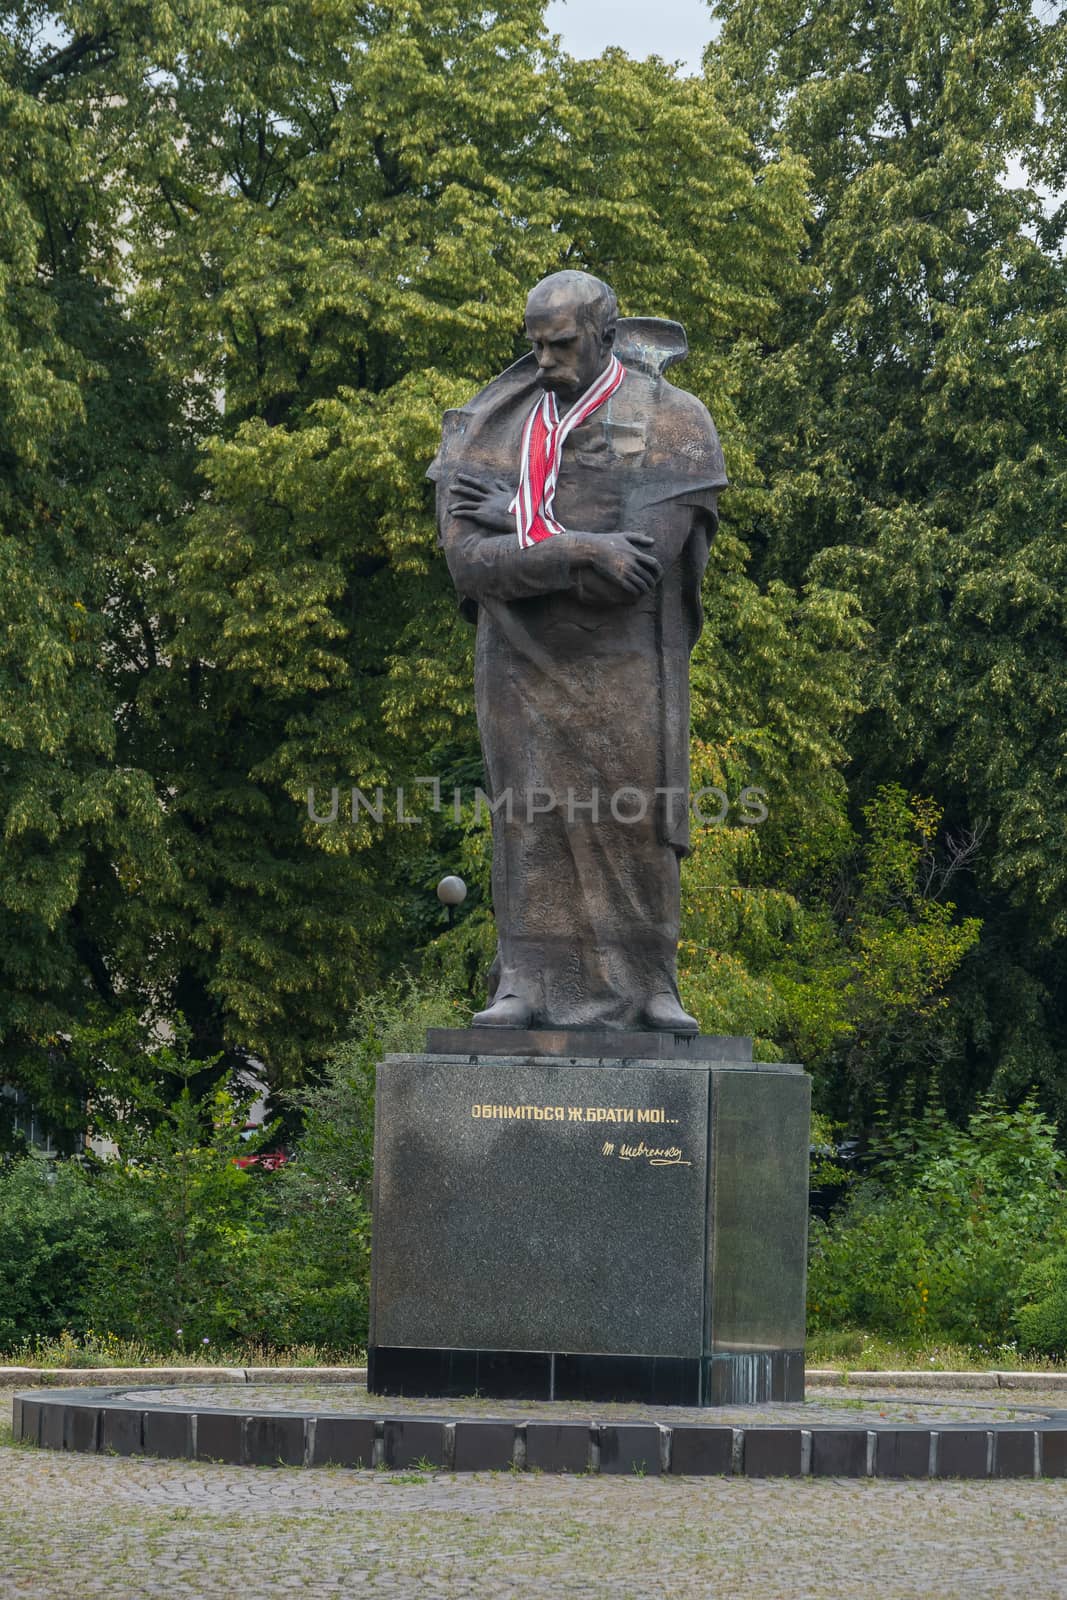 a thoughtful monument to Taras Shevchenko, who bowed his head down against the greenery of trees by Adamchuk